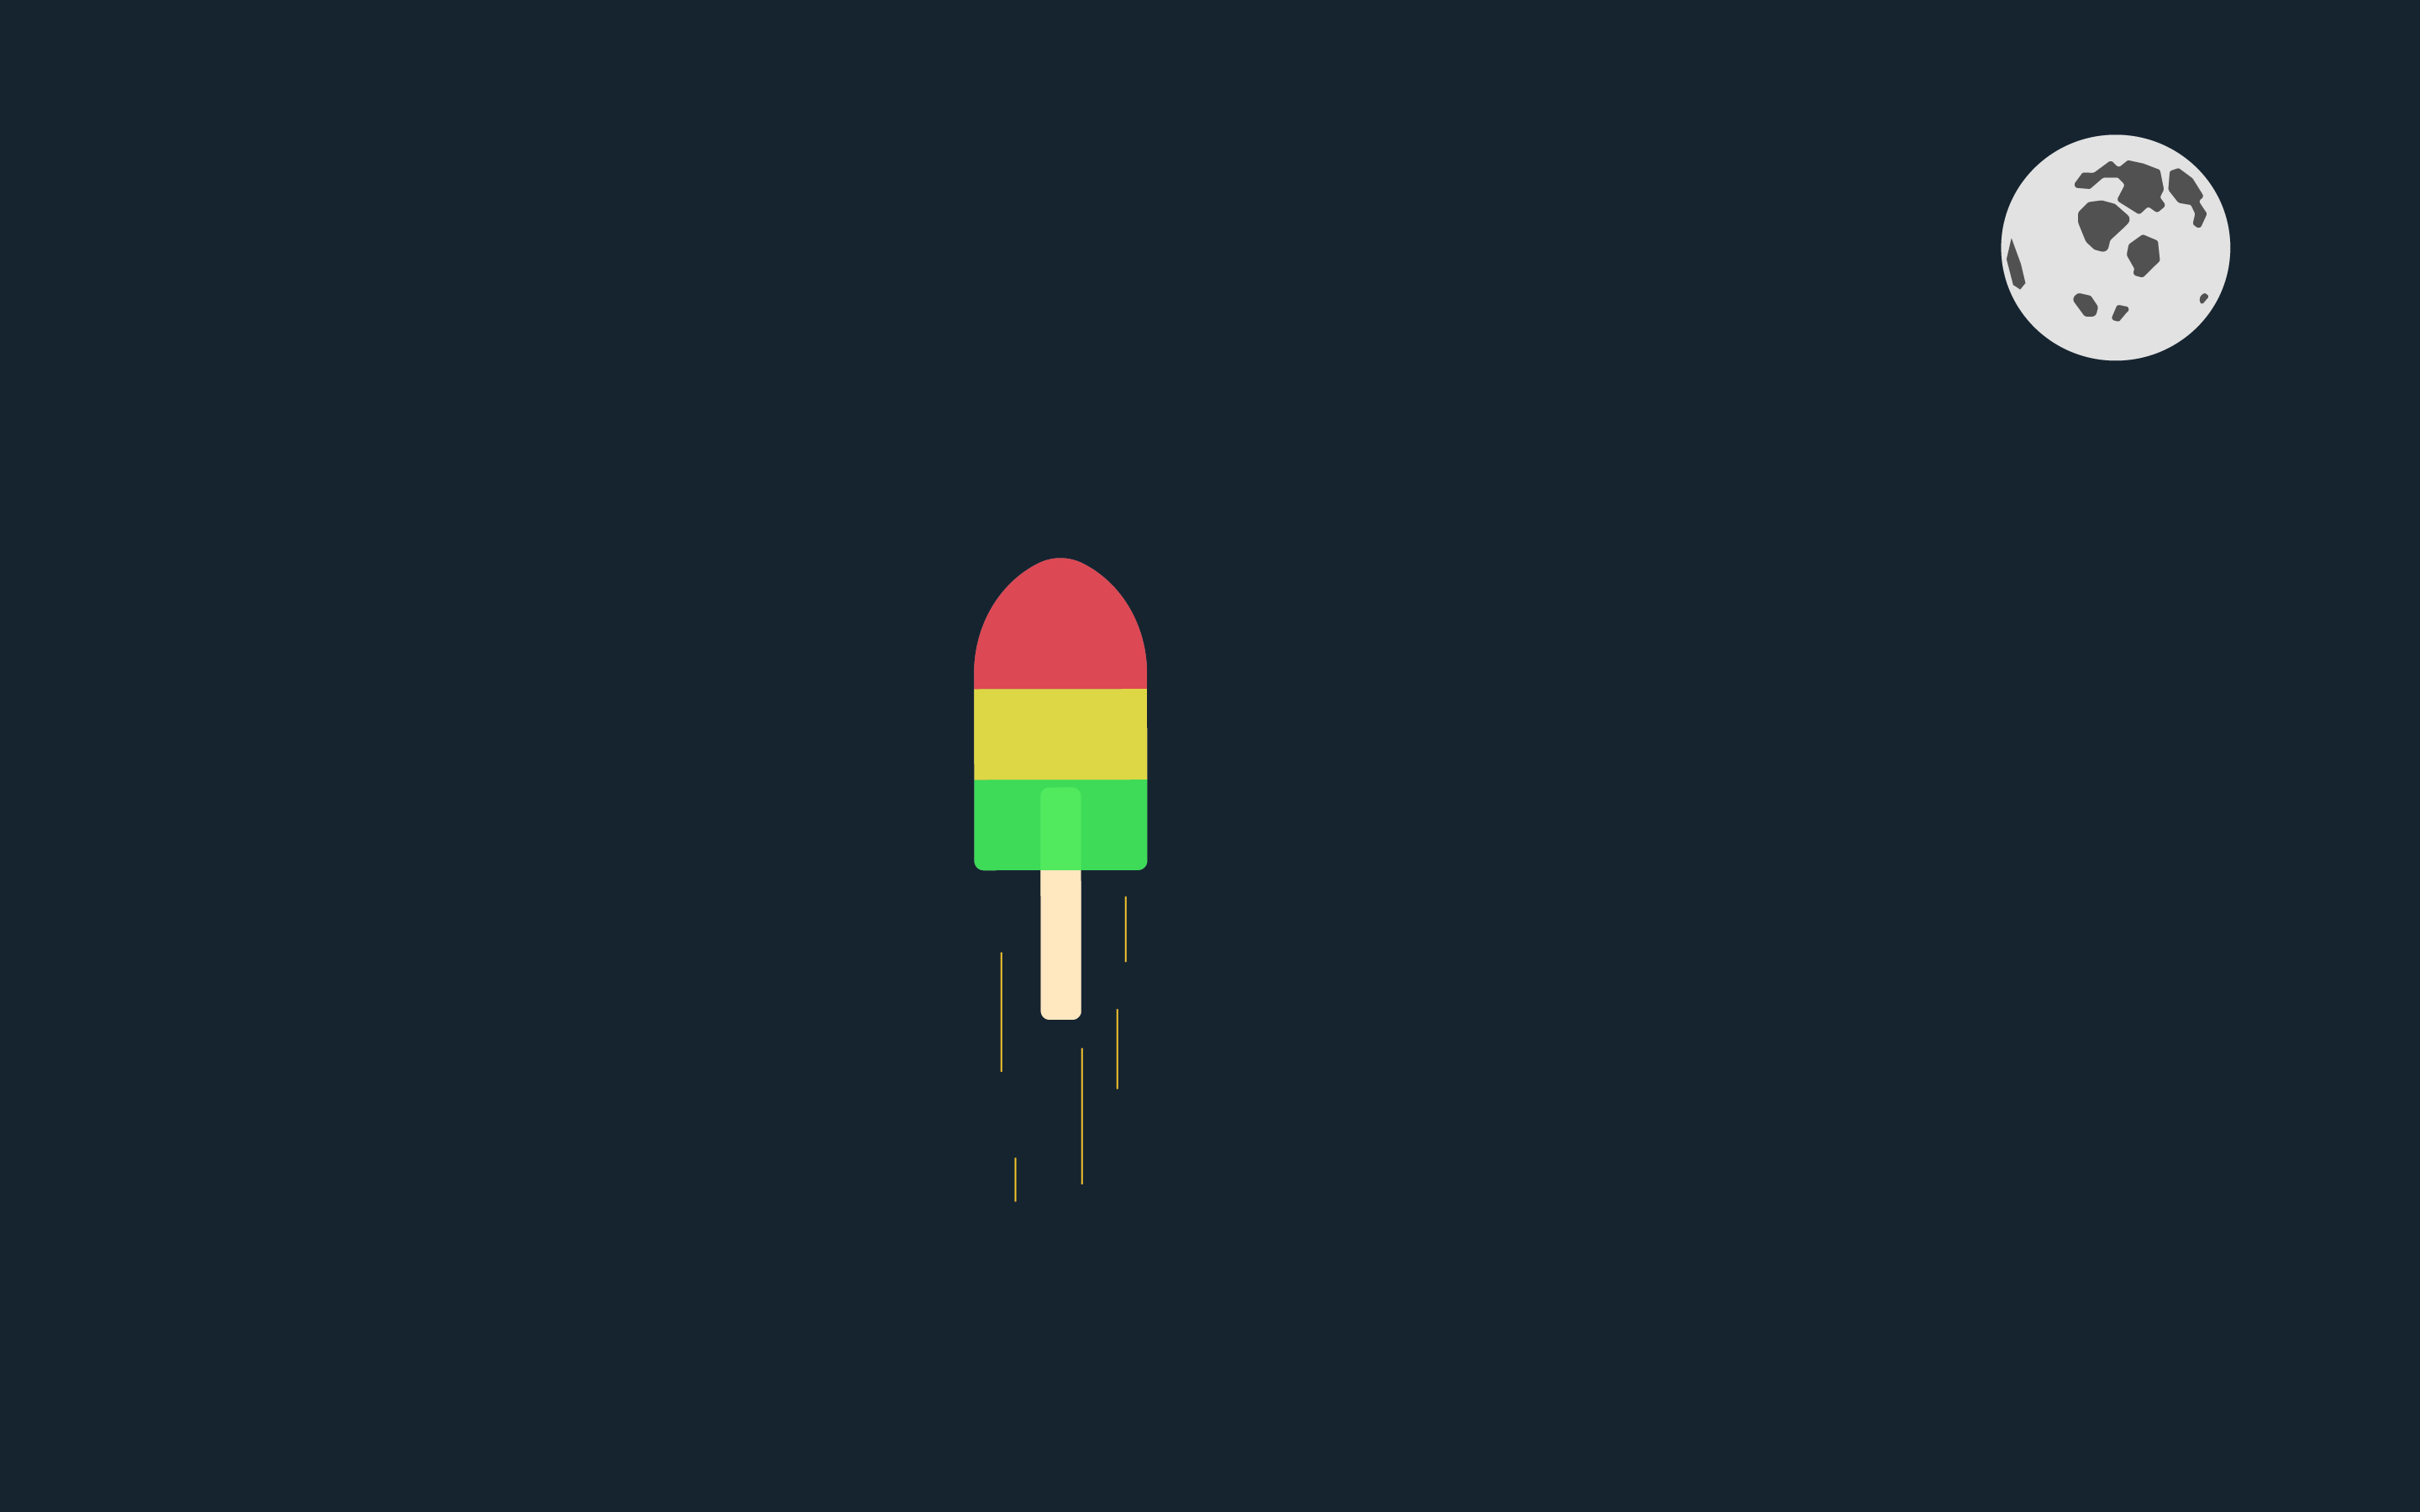 Wallpaper, simple, popsicle, space, minimalism 2880x1800